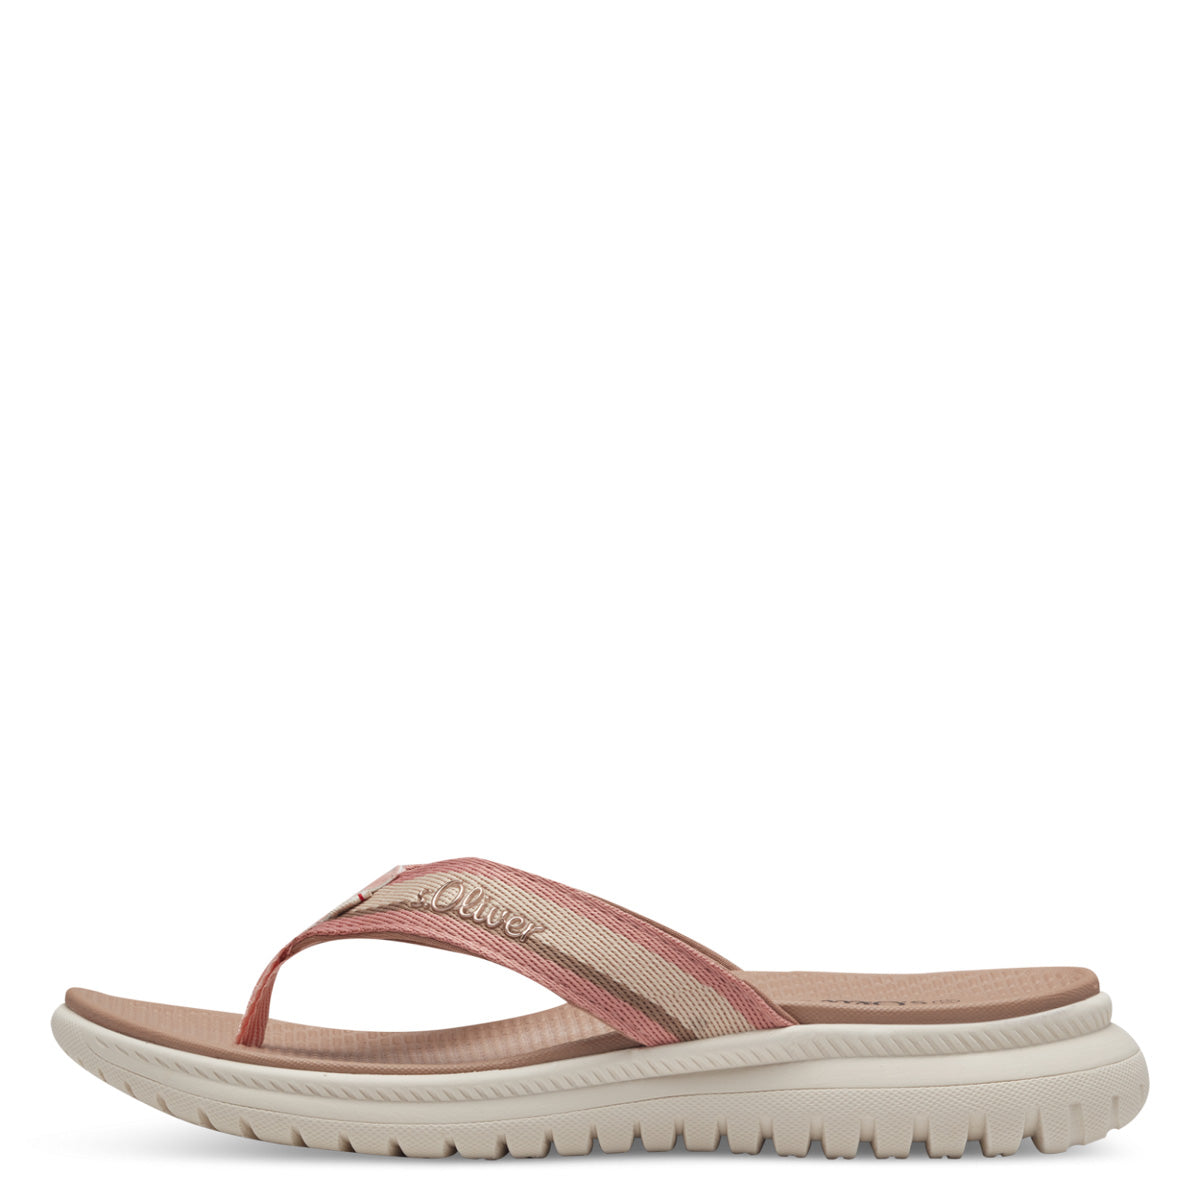     Front view of s.Oliver rose pink sandals showing the toe bar.